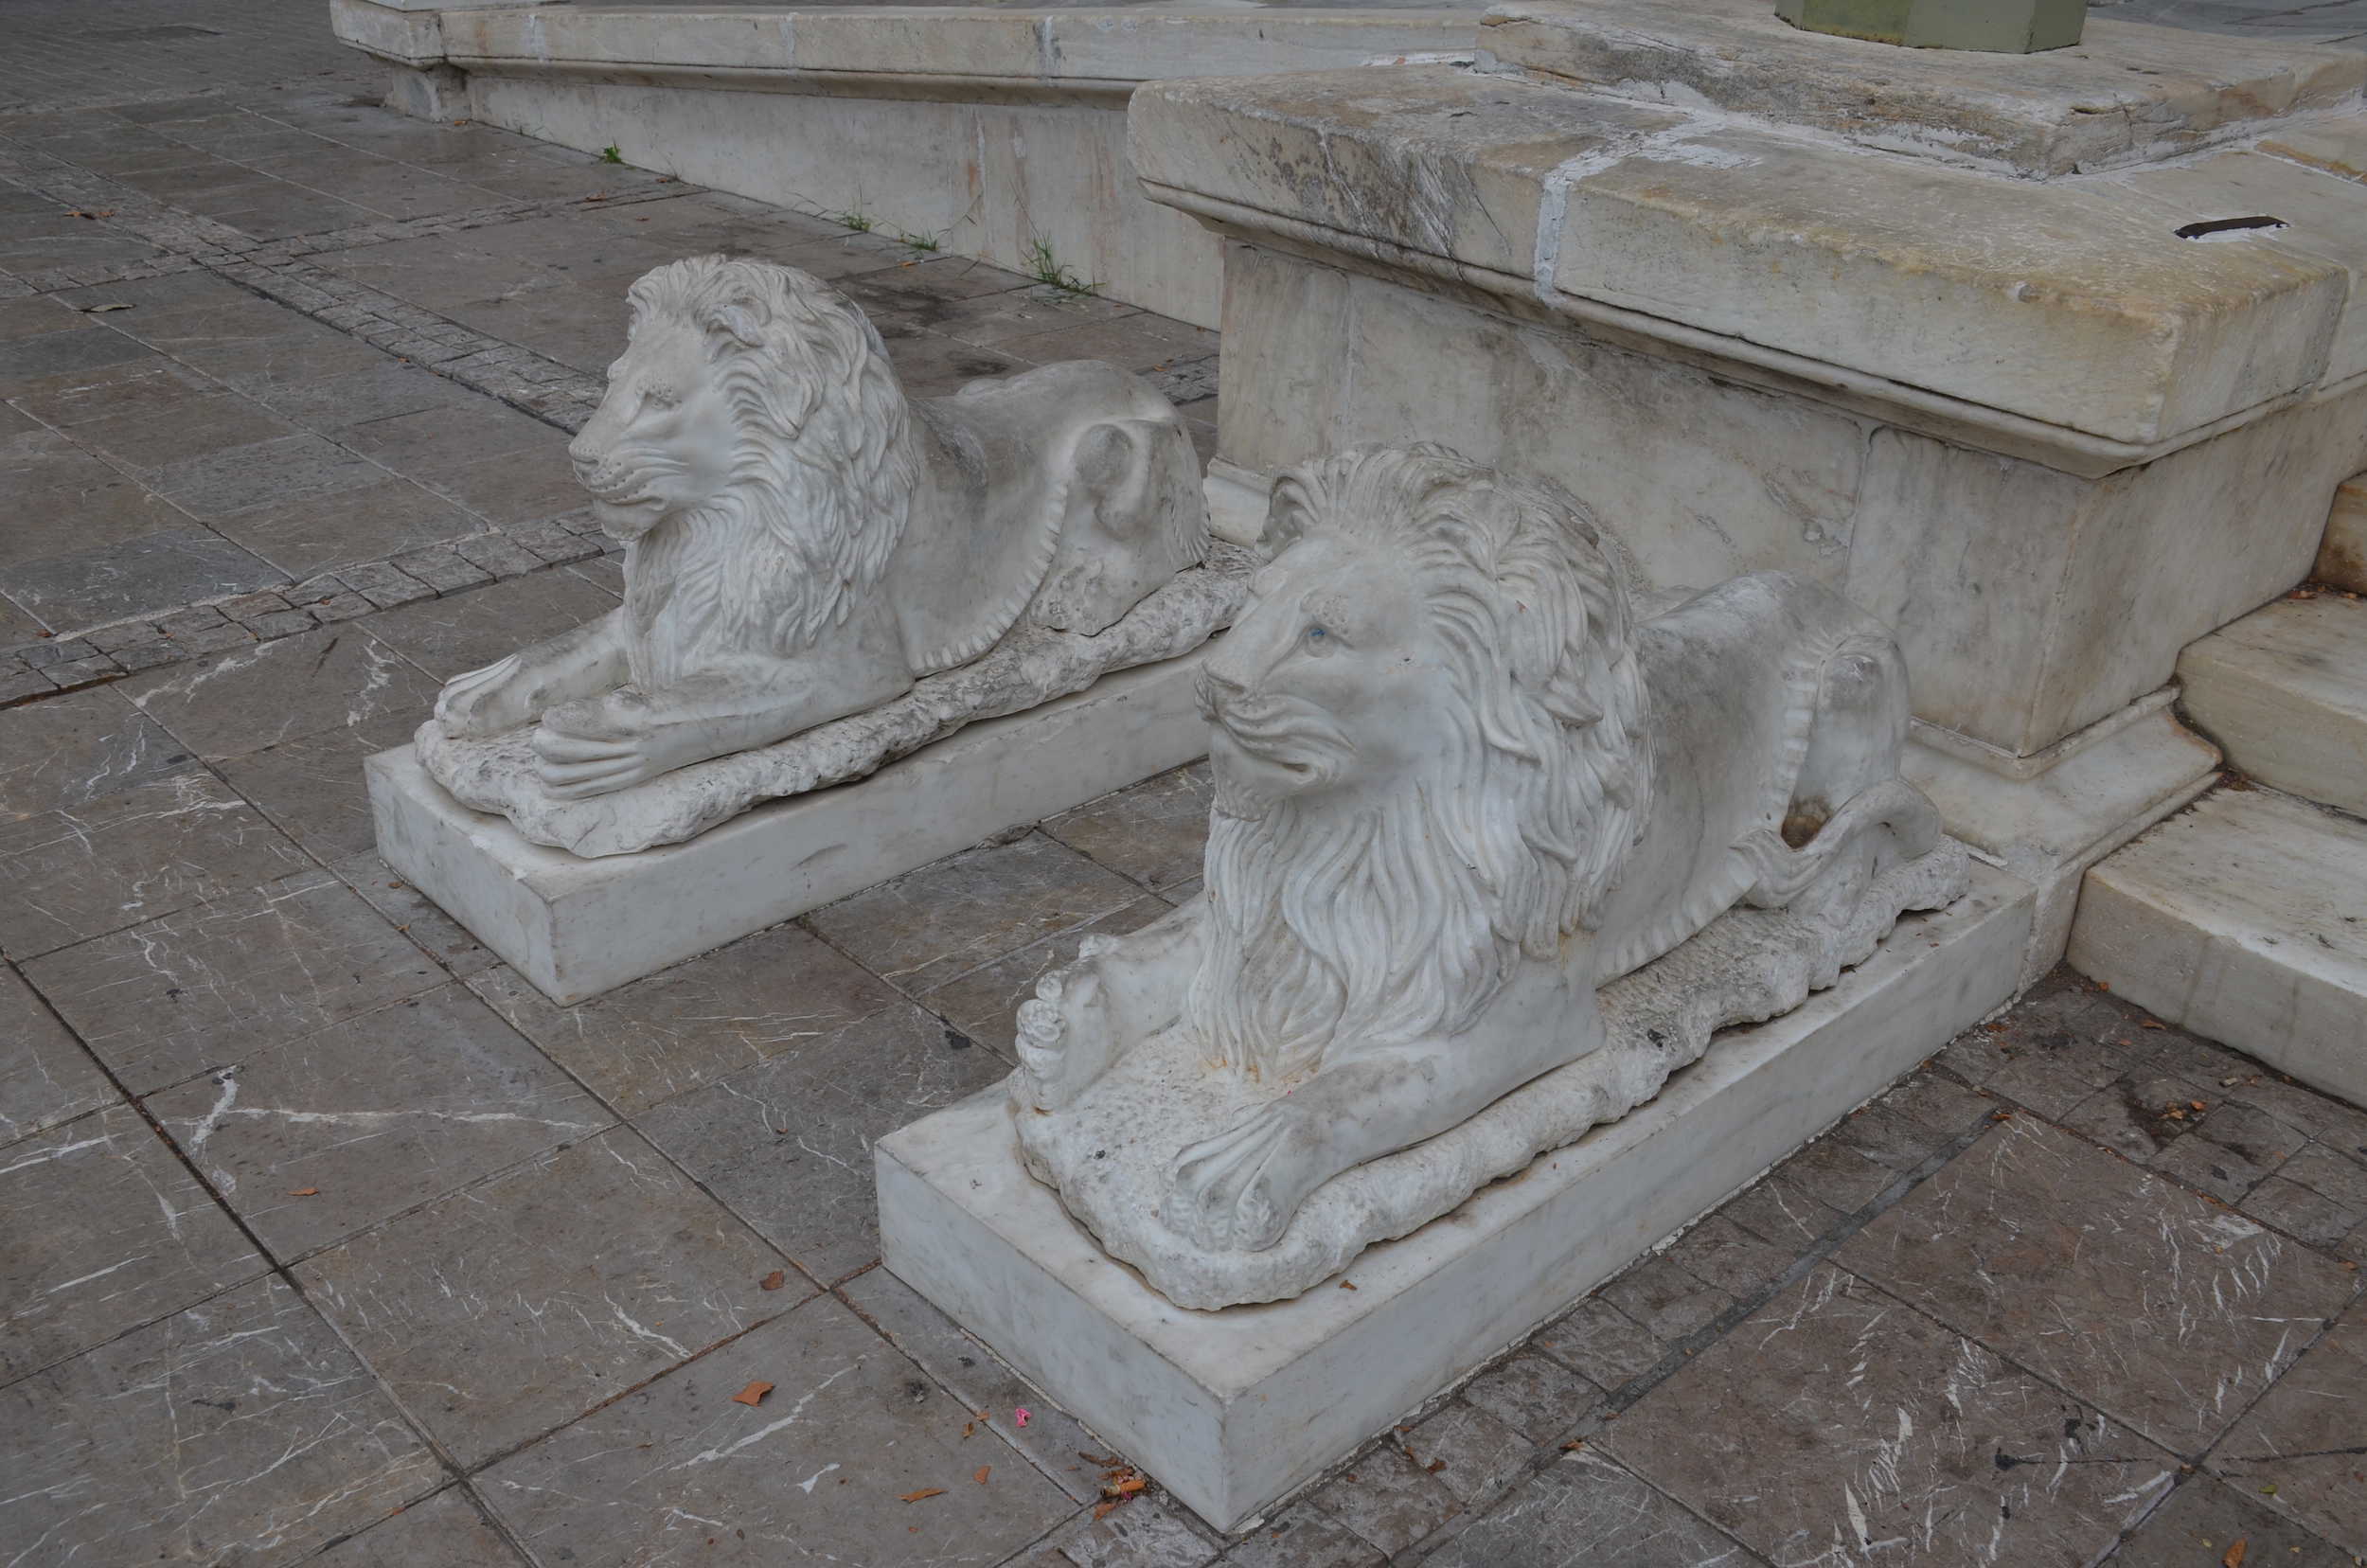 Marble lions guarding the steps to the Metropolitan Cathedral on Mitropoleos Square in Athens, Greece